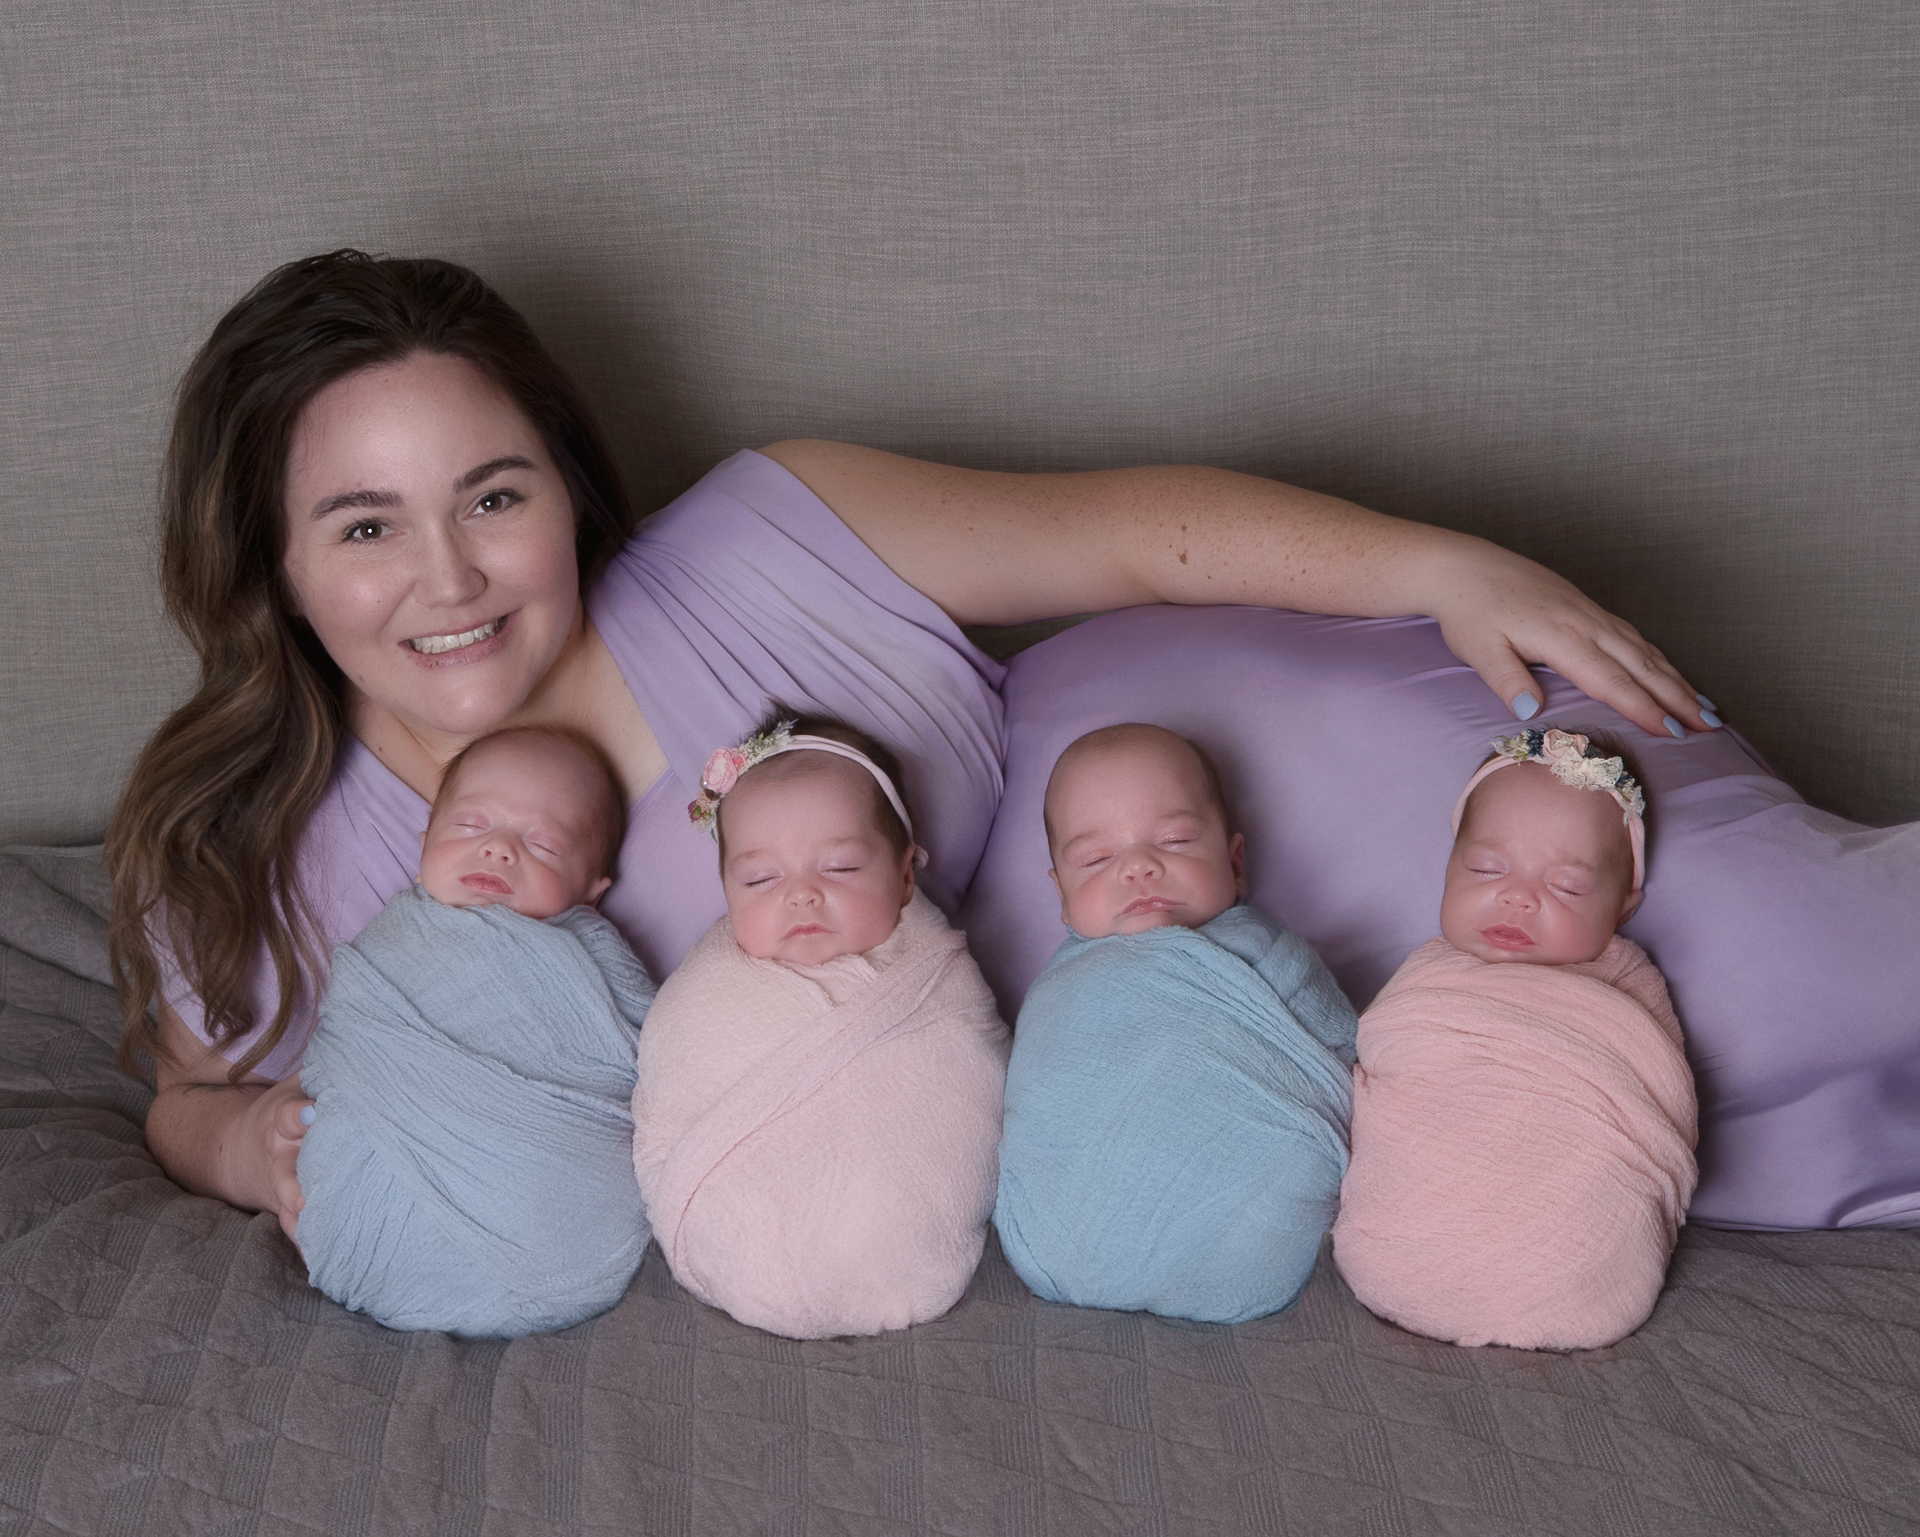 Mother wearing purple dress lays on a bed posing indoors with her four newborns which are placed in front of her. Two of them wear pink wrap outfits and headbands, two of them wear blue wrap outfits.